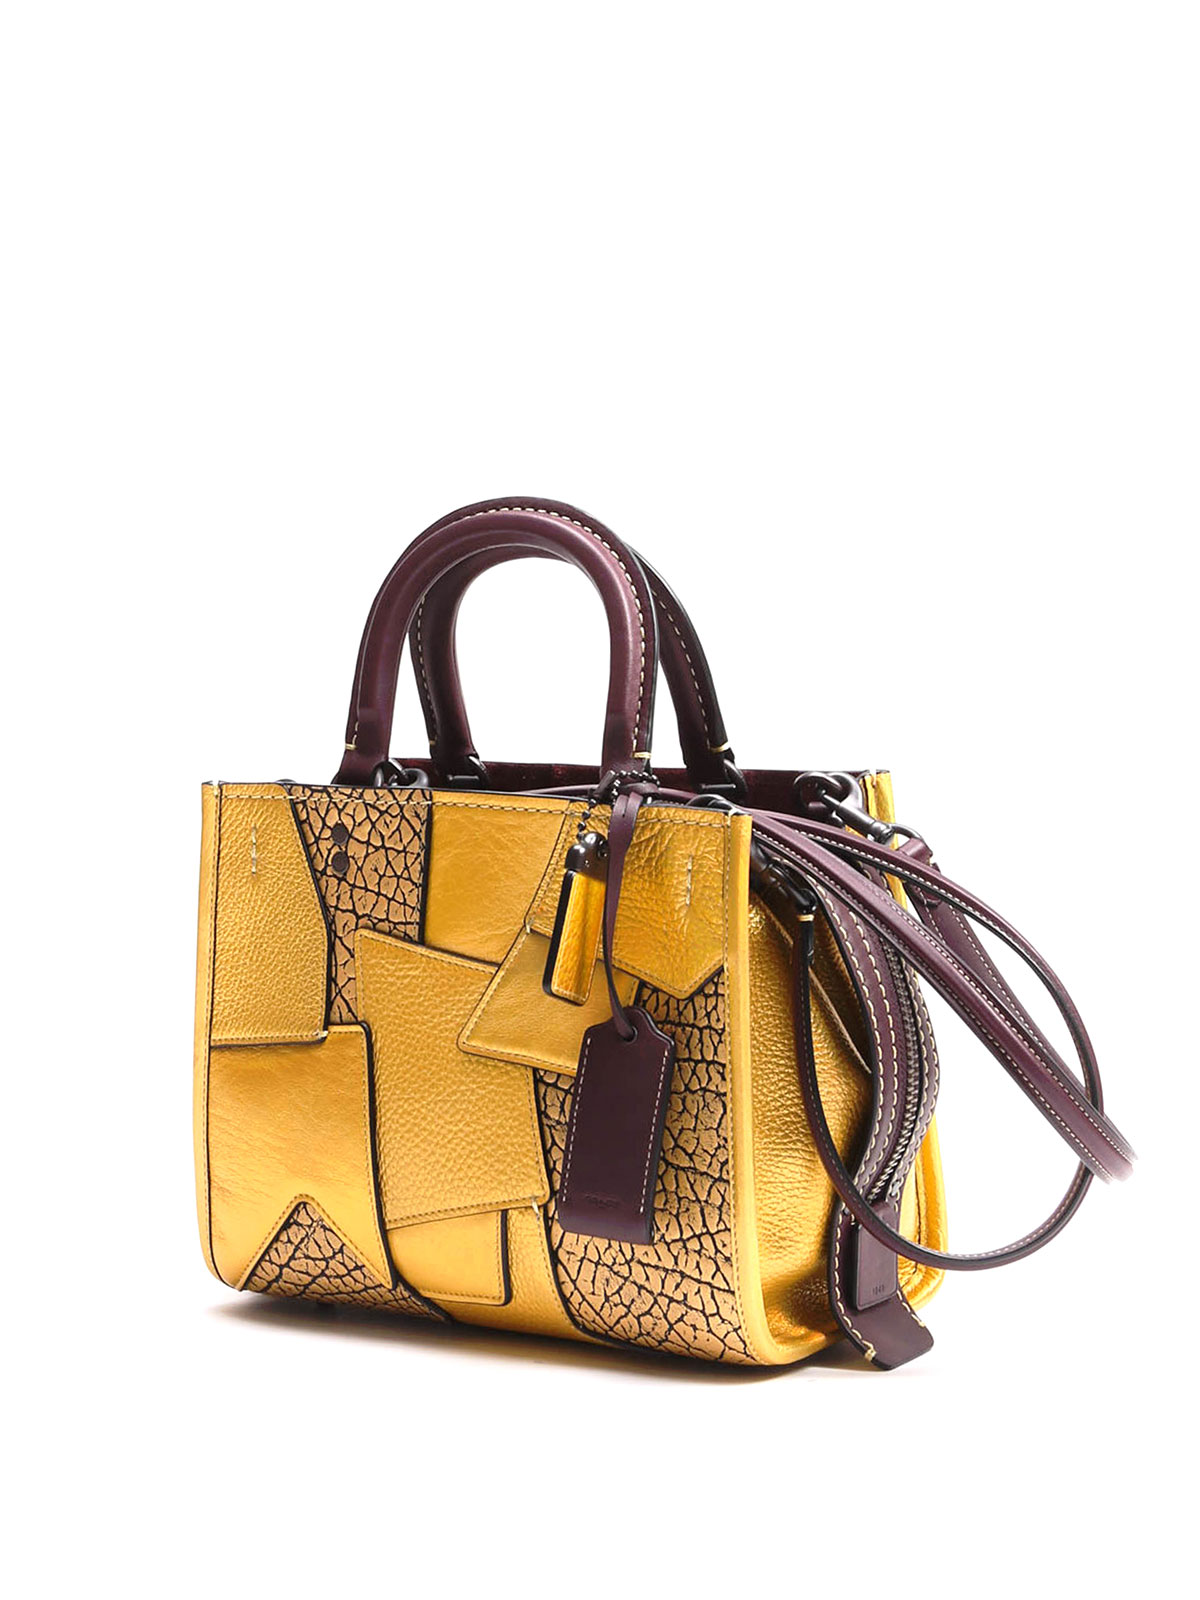 Cross body bags Coach - Rogue patchwork leather bag - 54539 | iKRIX.com